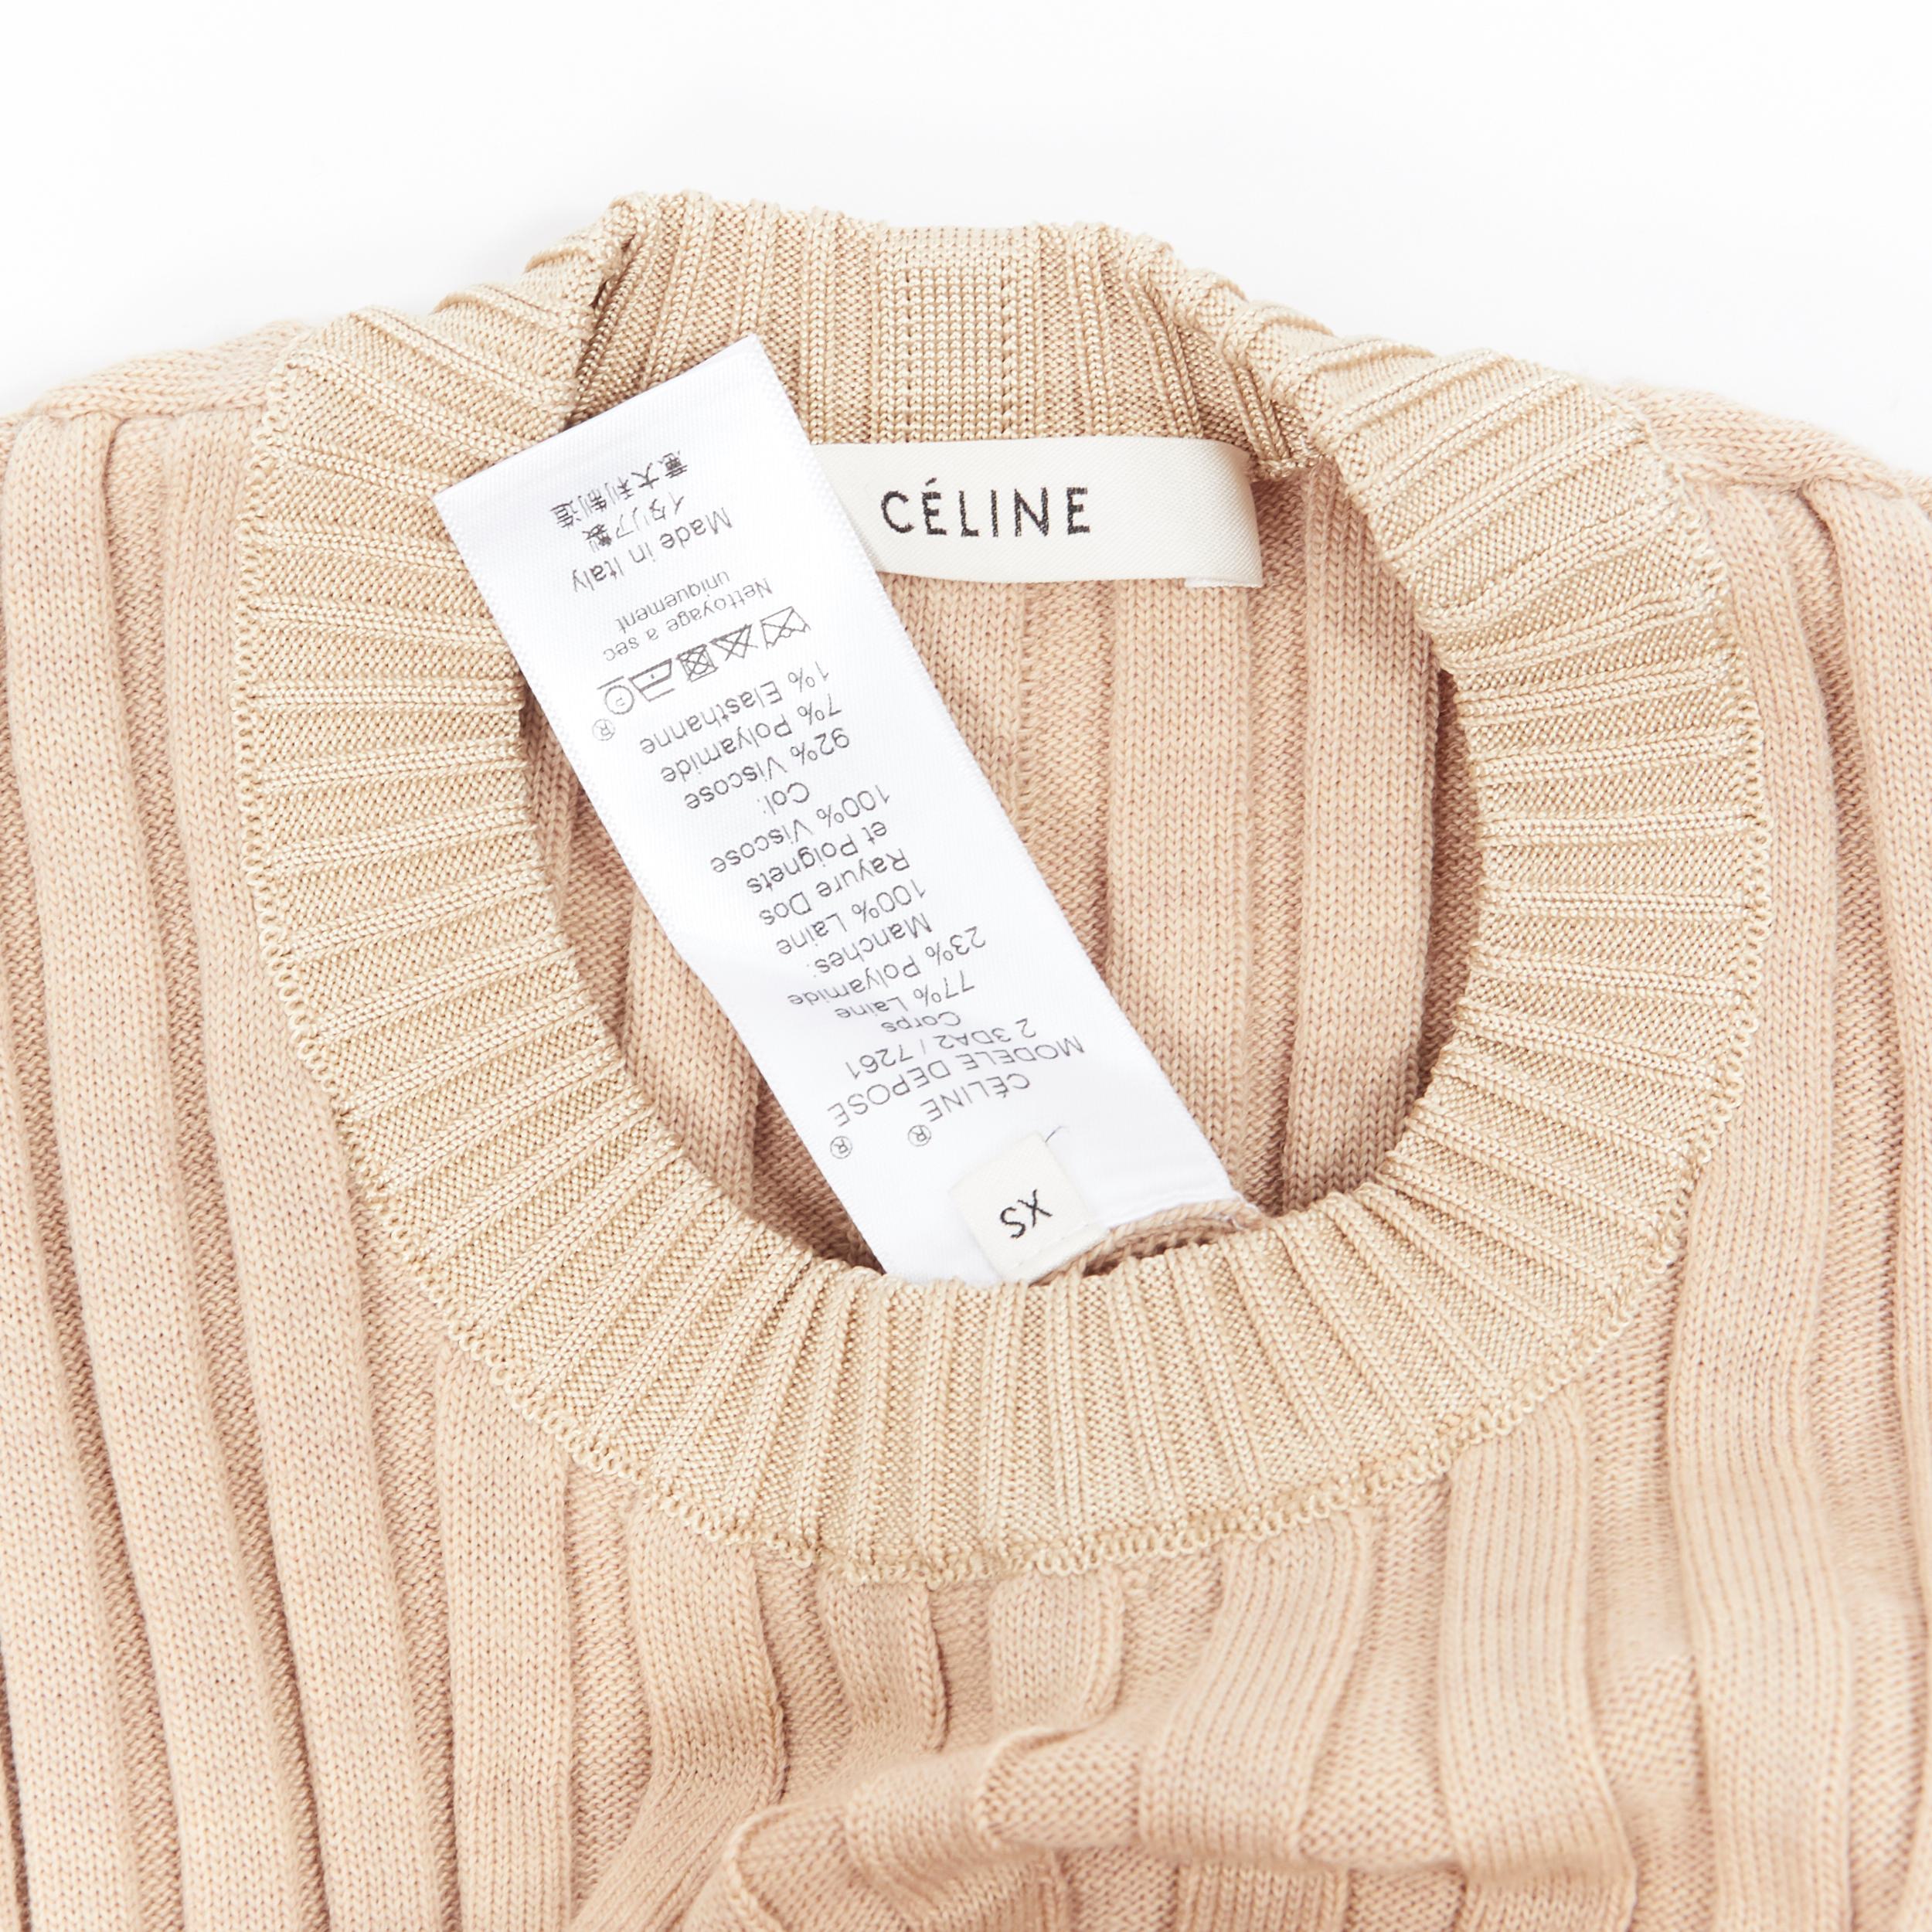 runway OLD CELINE Phoebe Philo beige ribbed knit flared bell cuff sweater top XS 3